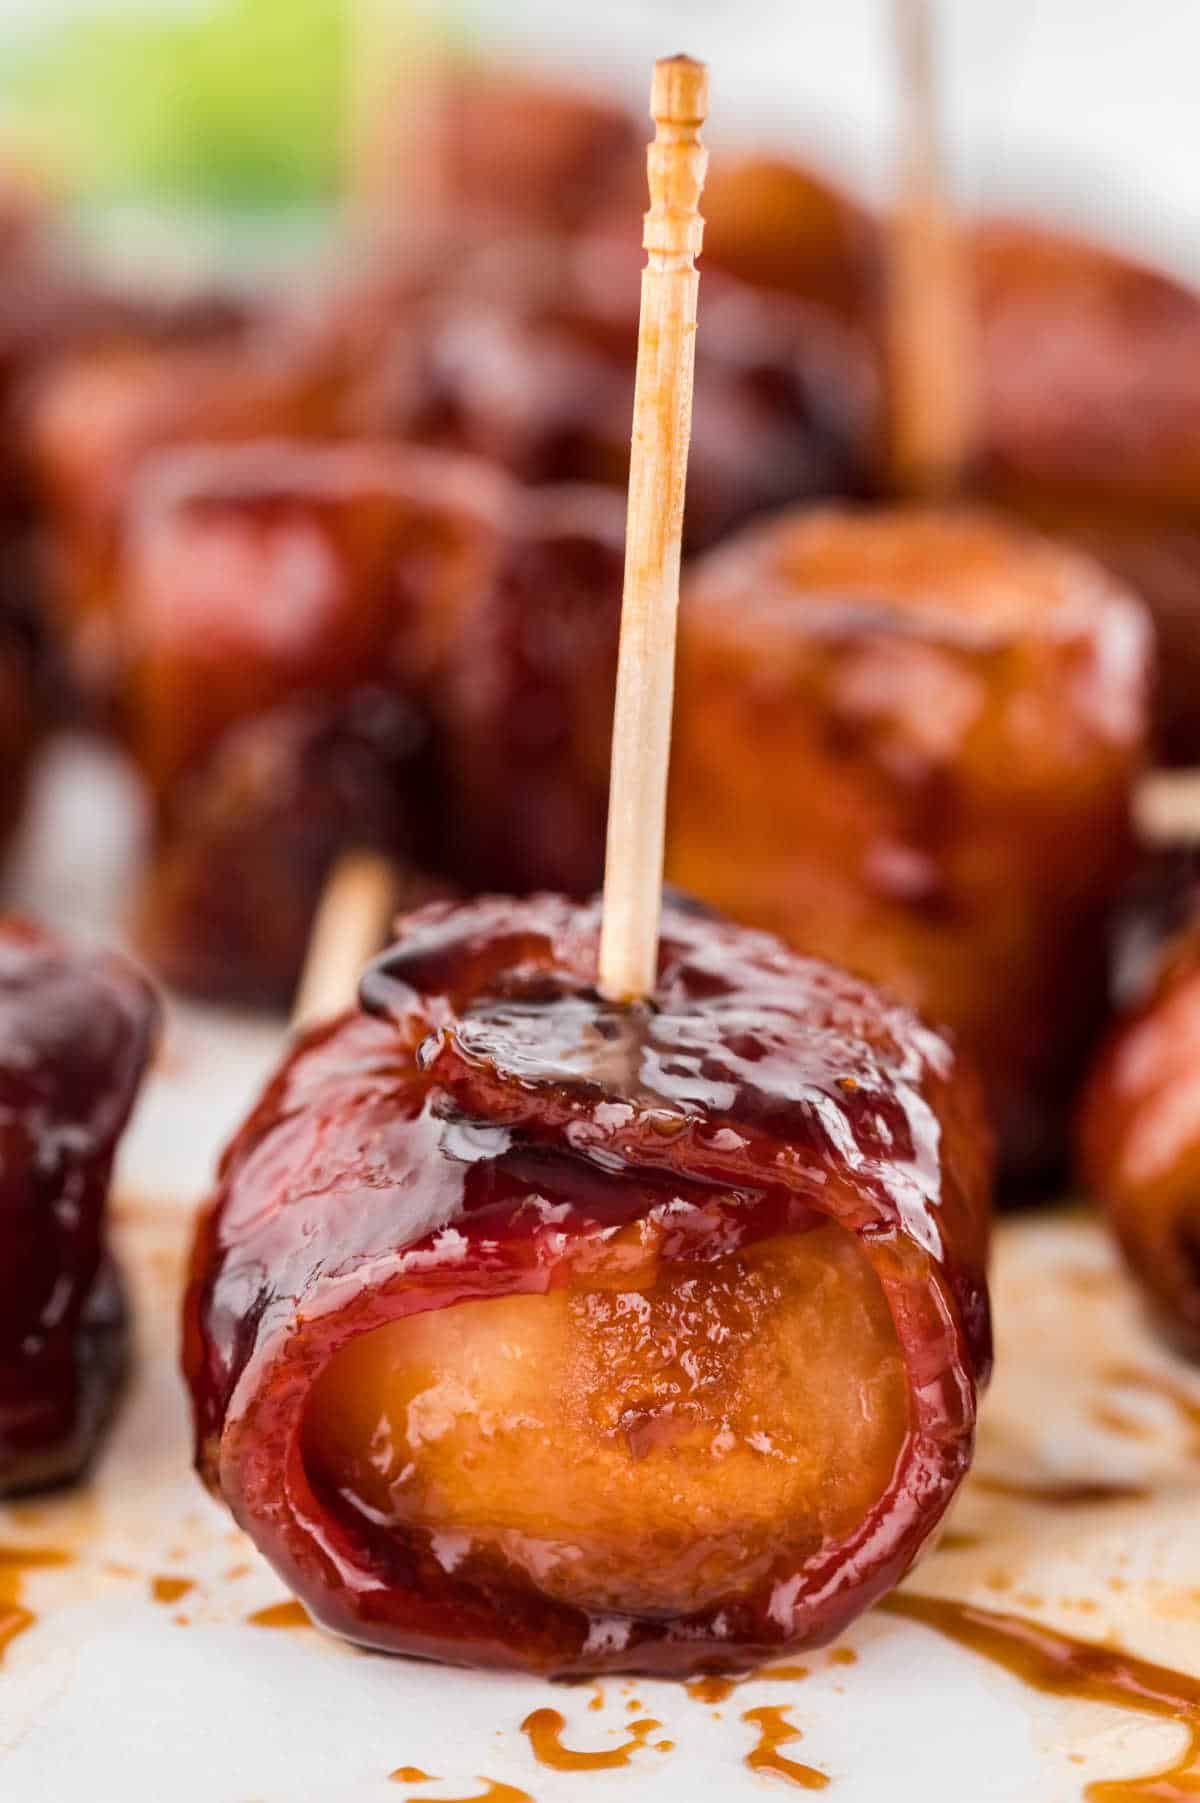 Bacon wrapped water chestnut with a toothpick.